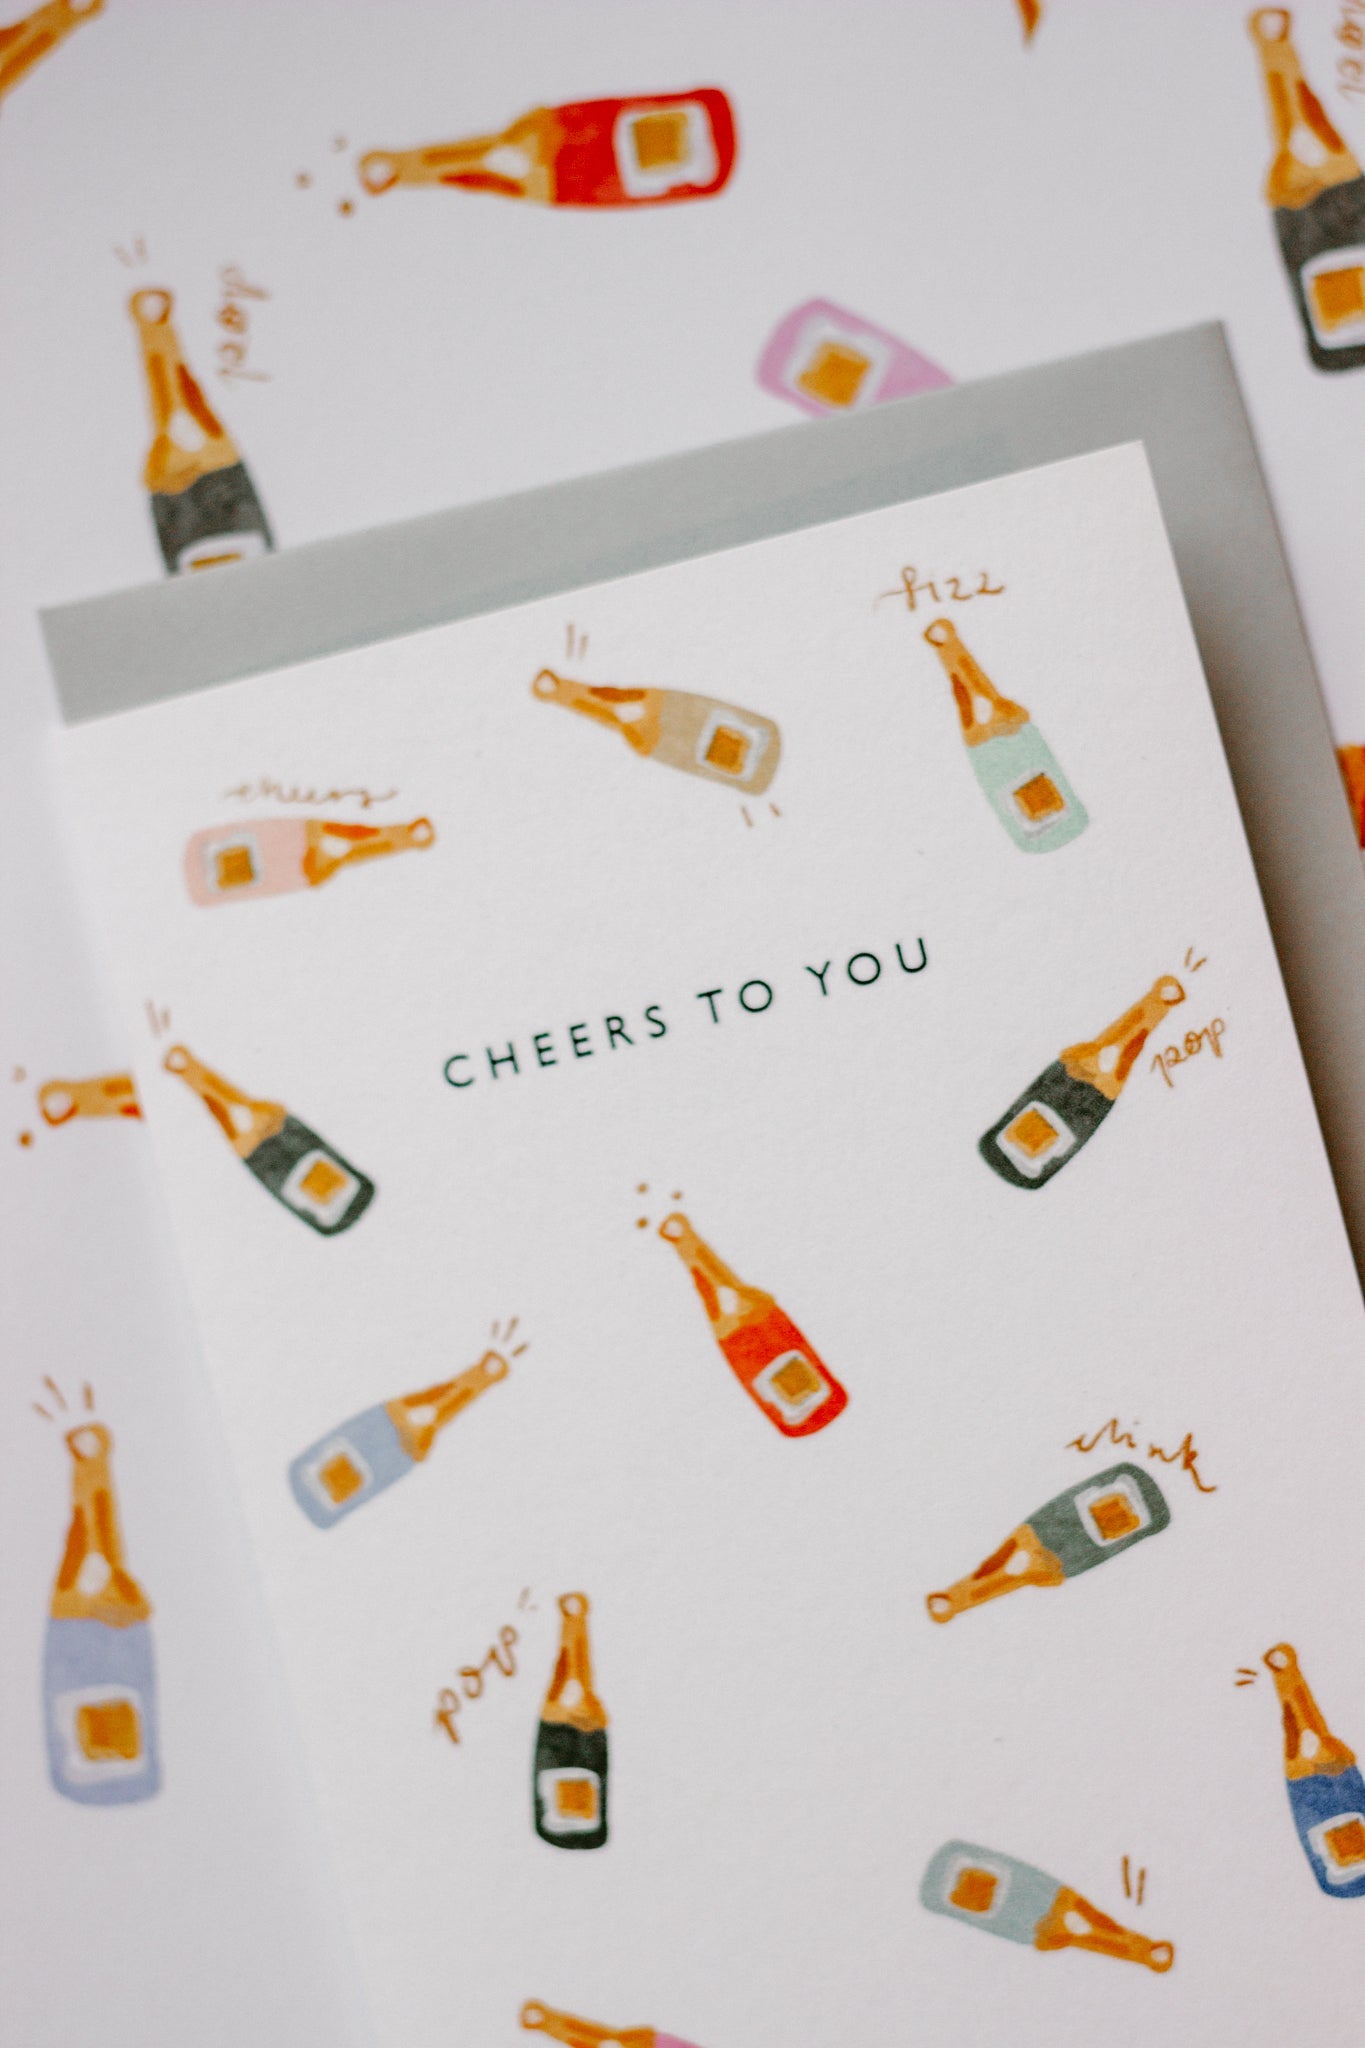 Cheers To You! Greetings Card